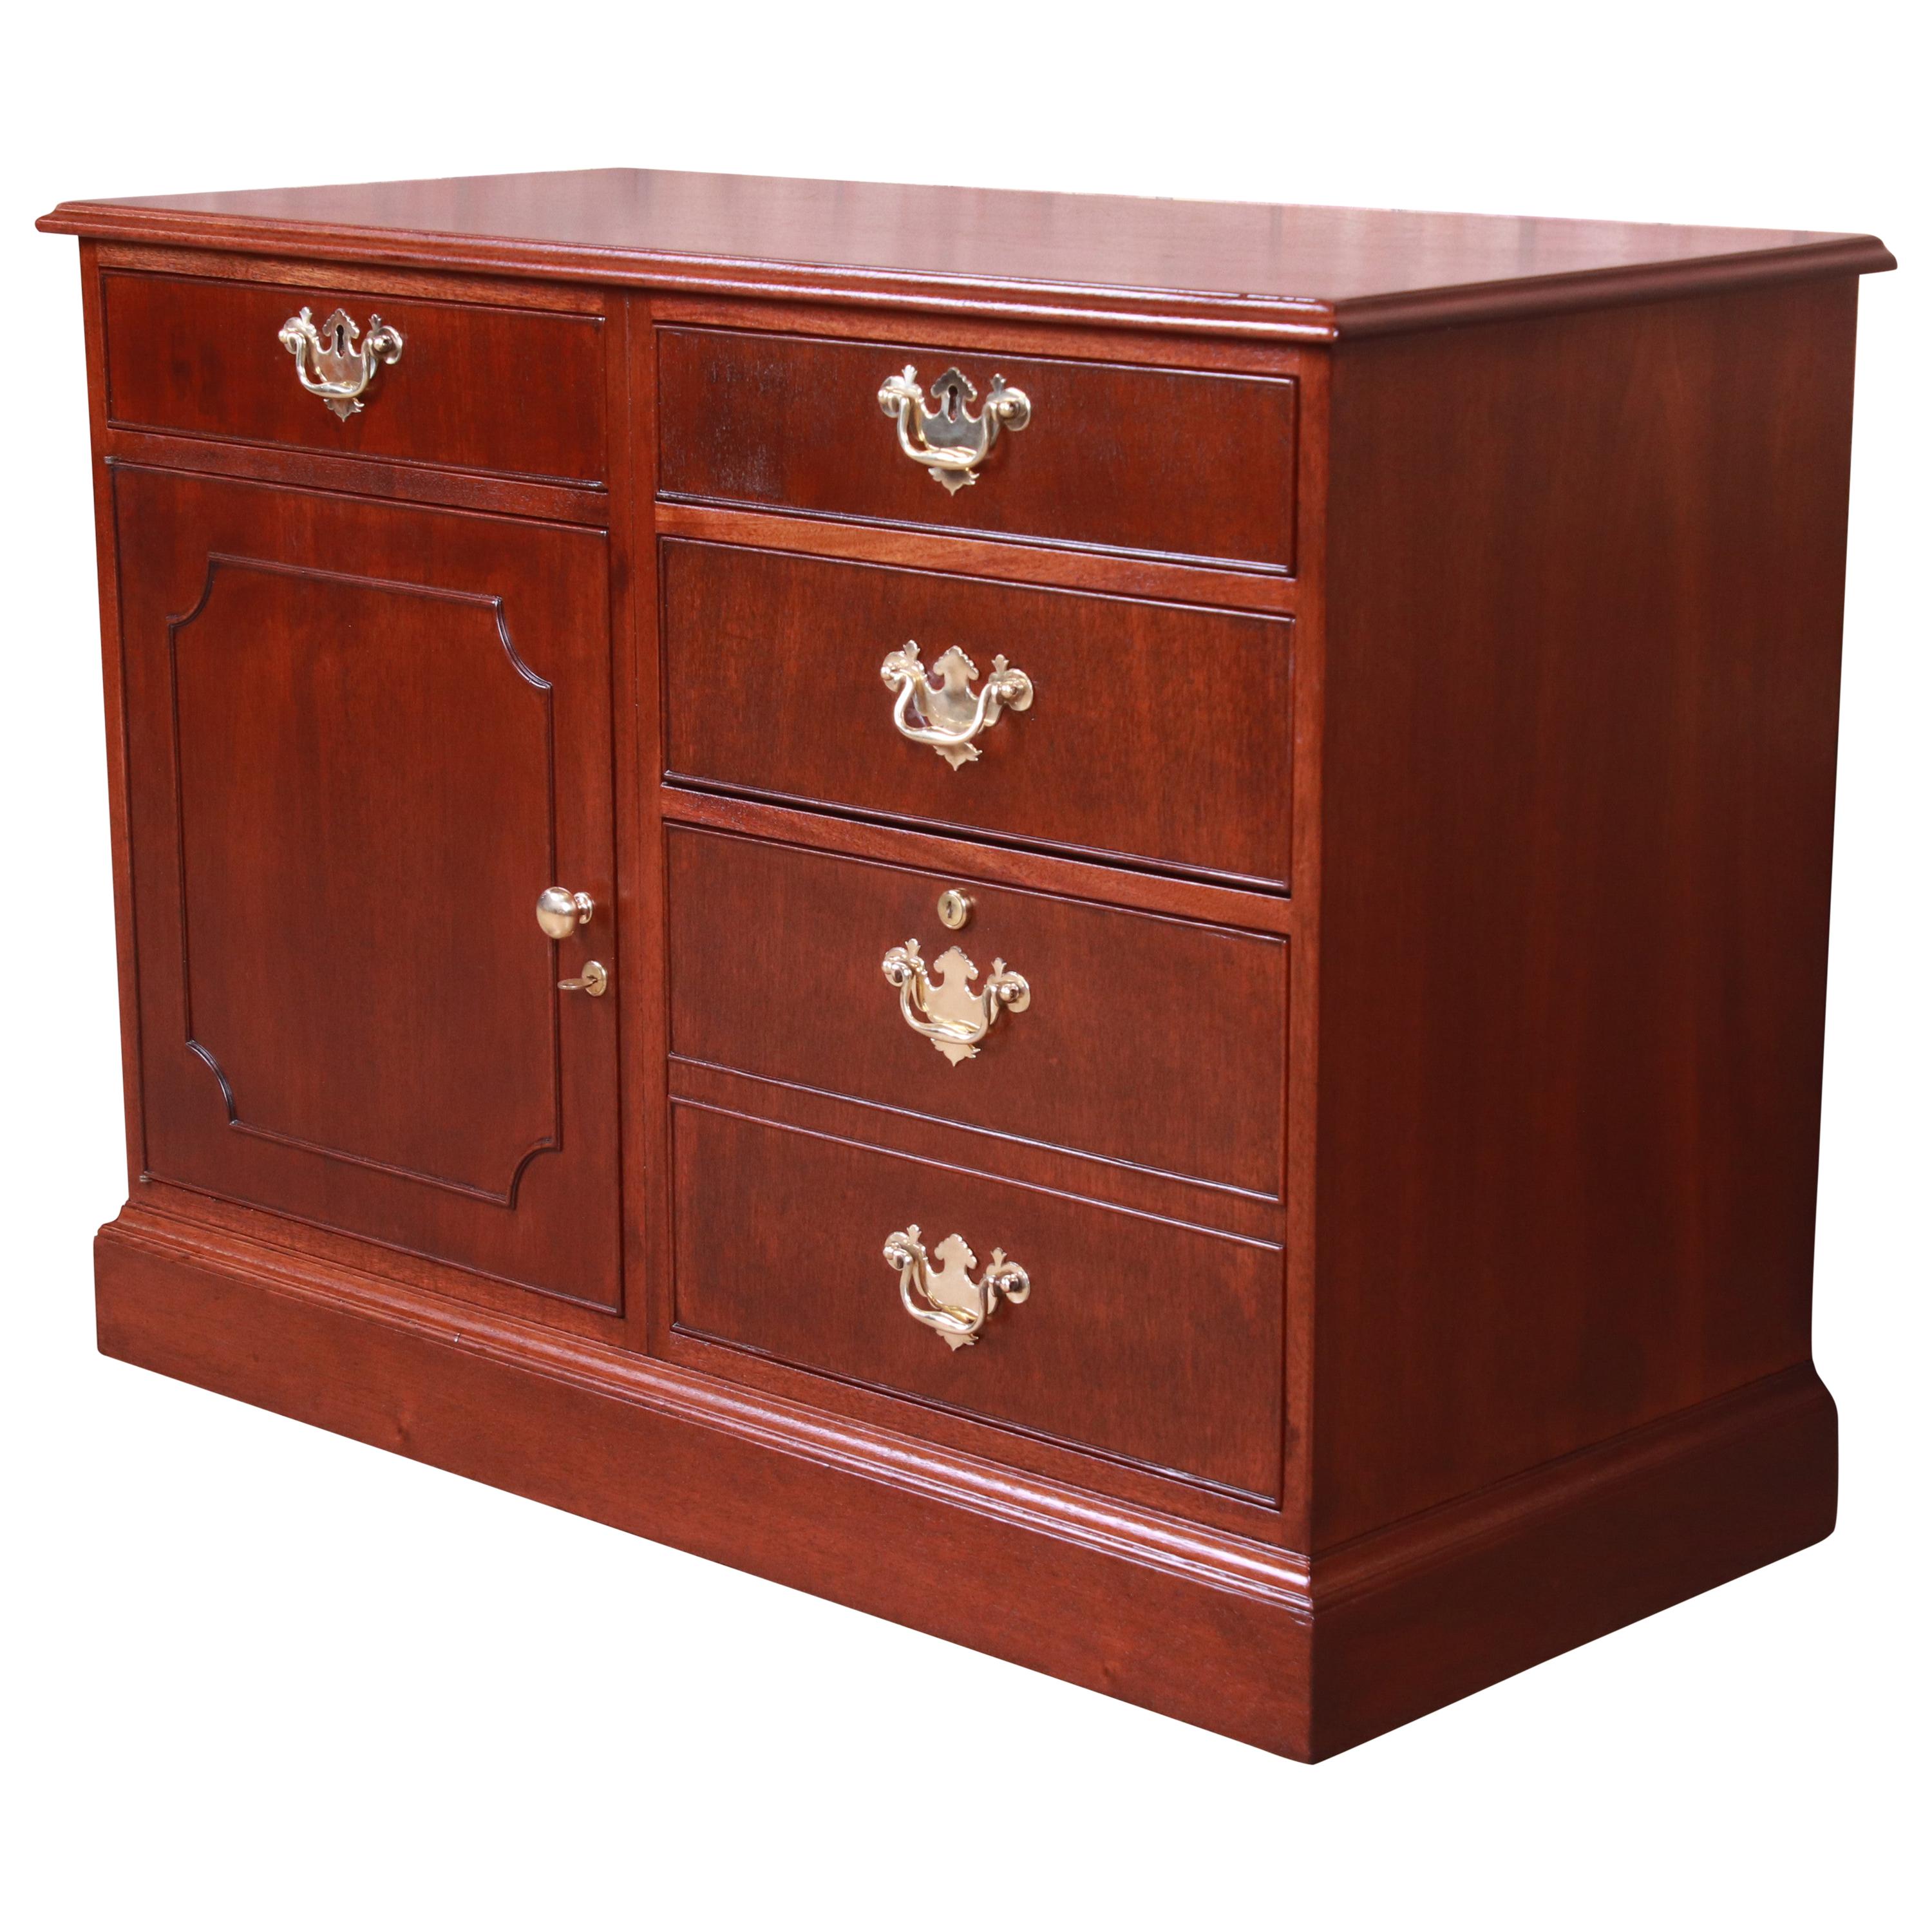 Kittinger American Chippendale Mahogany Credenza or Bar Cabinet, Refinished